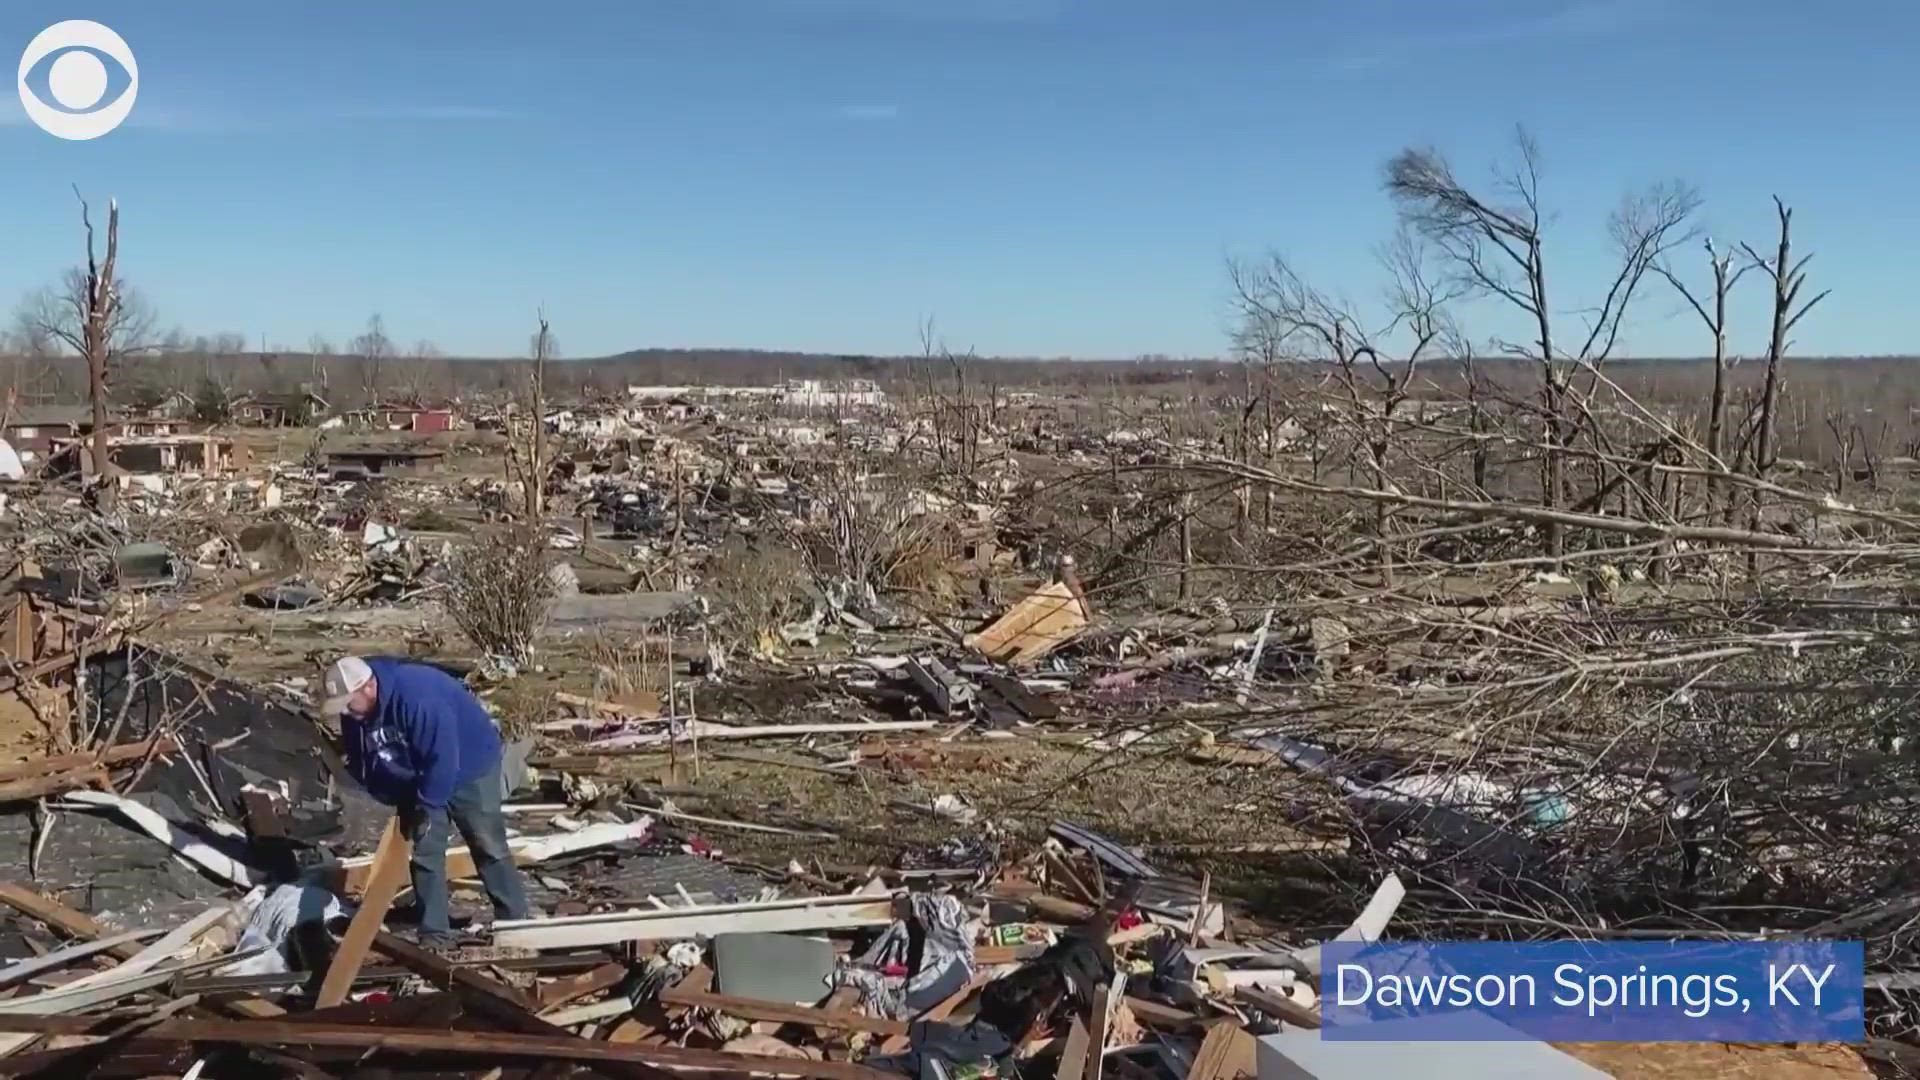 Dawson Springs, Kentucky, was one of the hardest-hit communities when tornadoes tore through the state Friday night. People sifted through debris Sunday.